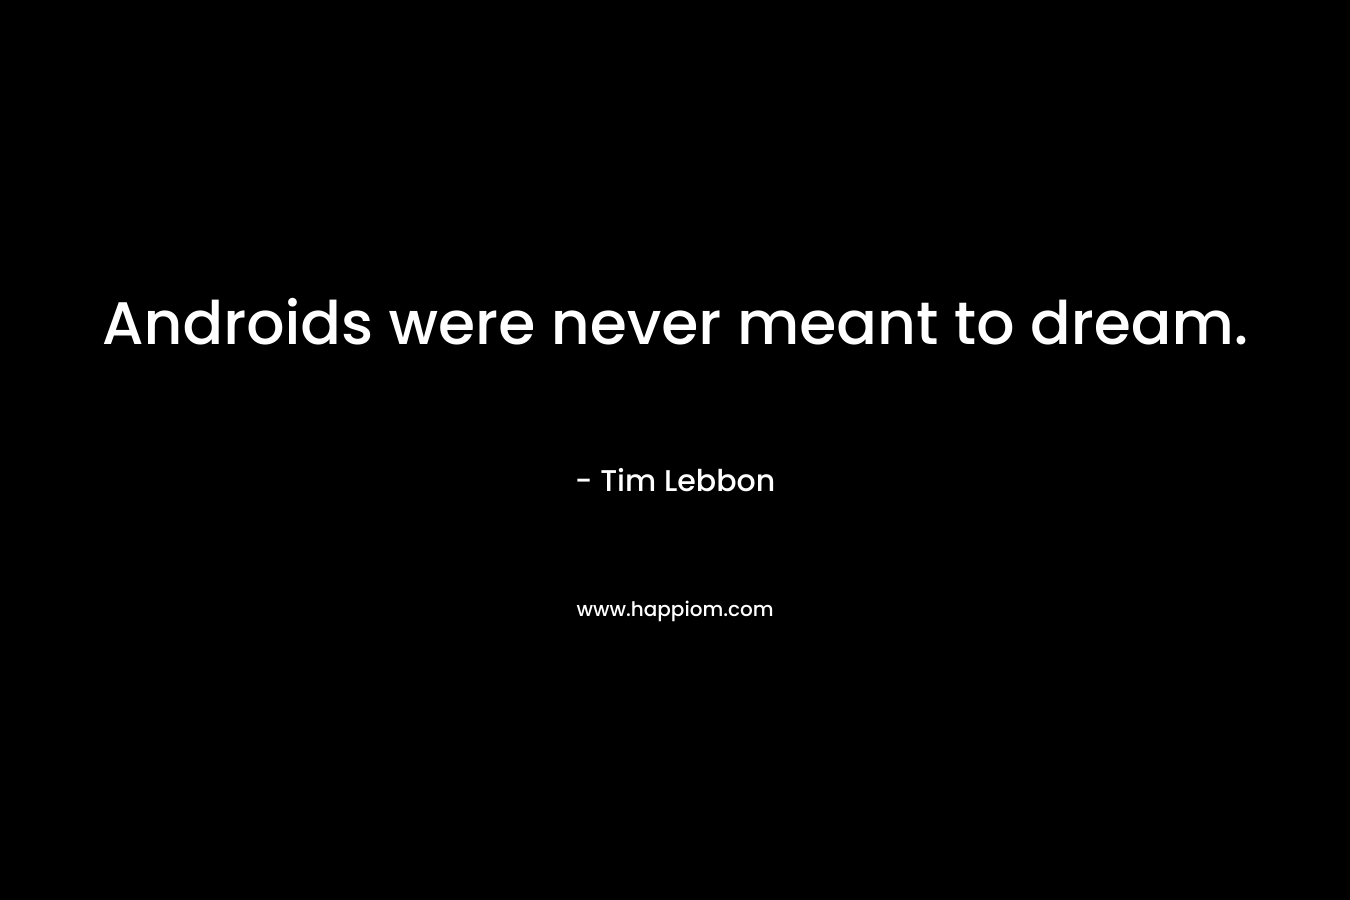 Androids were never meant to dream.